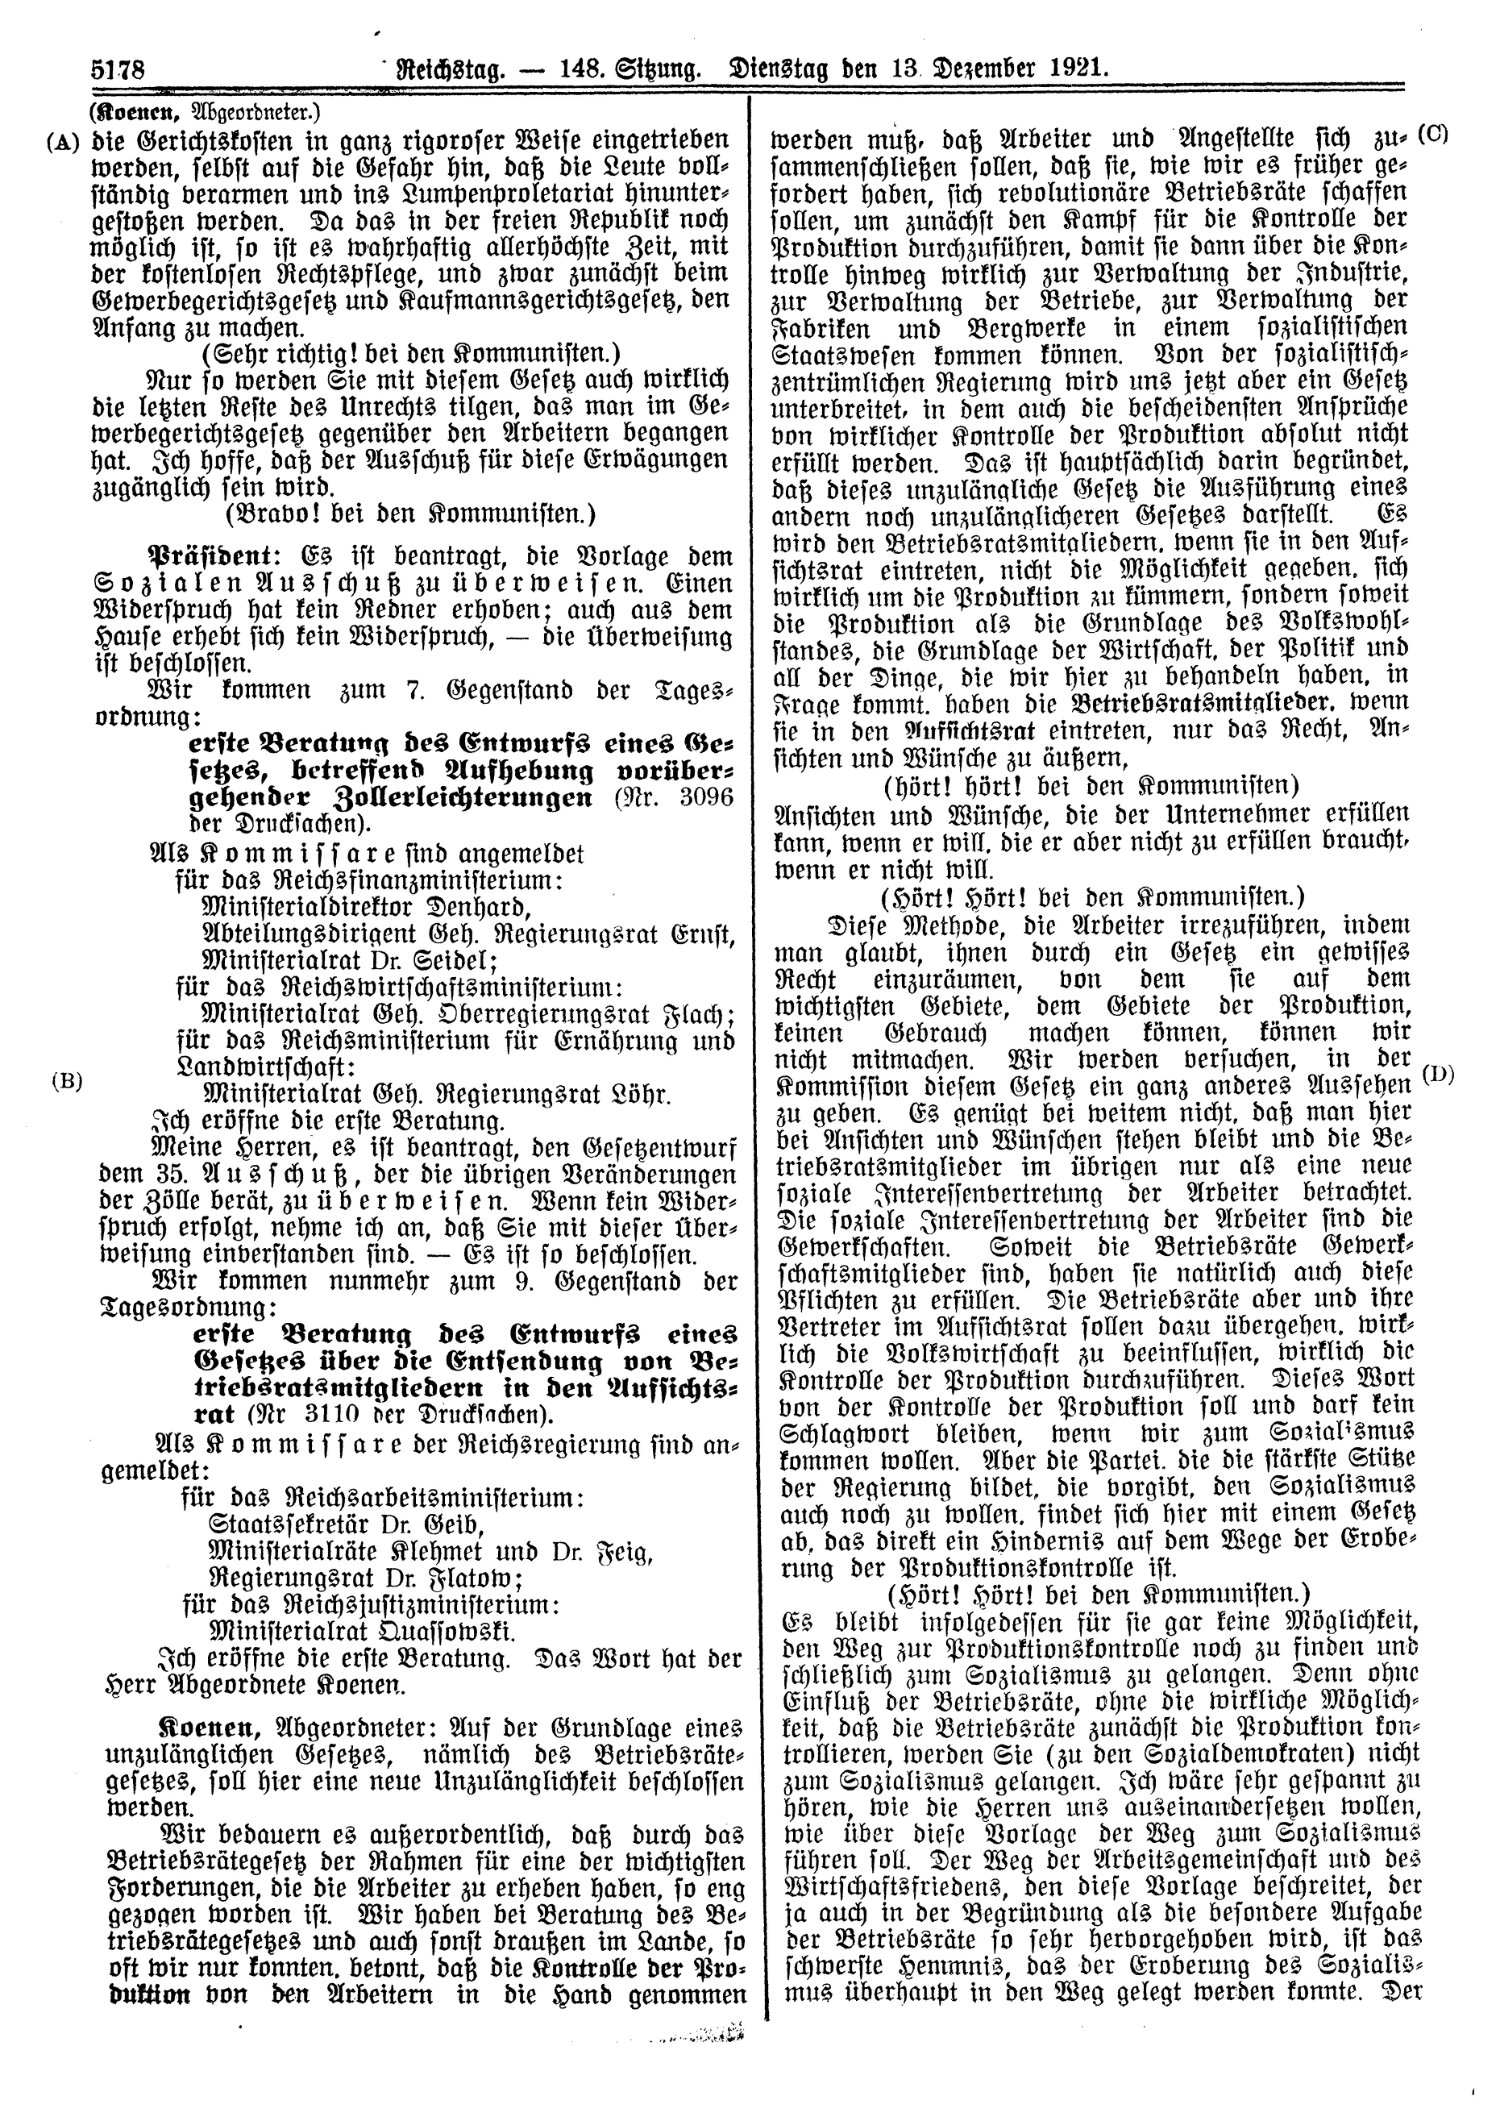 Scan of page 5178